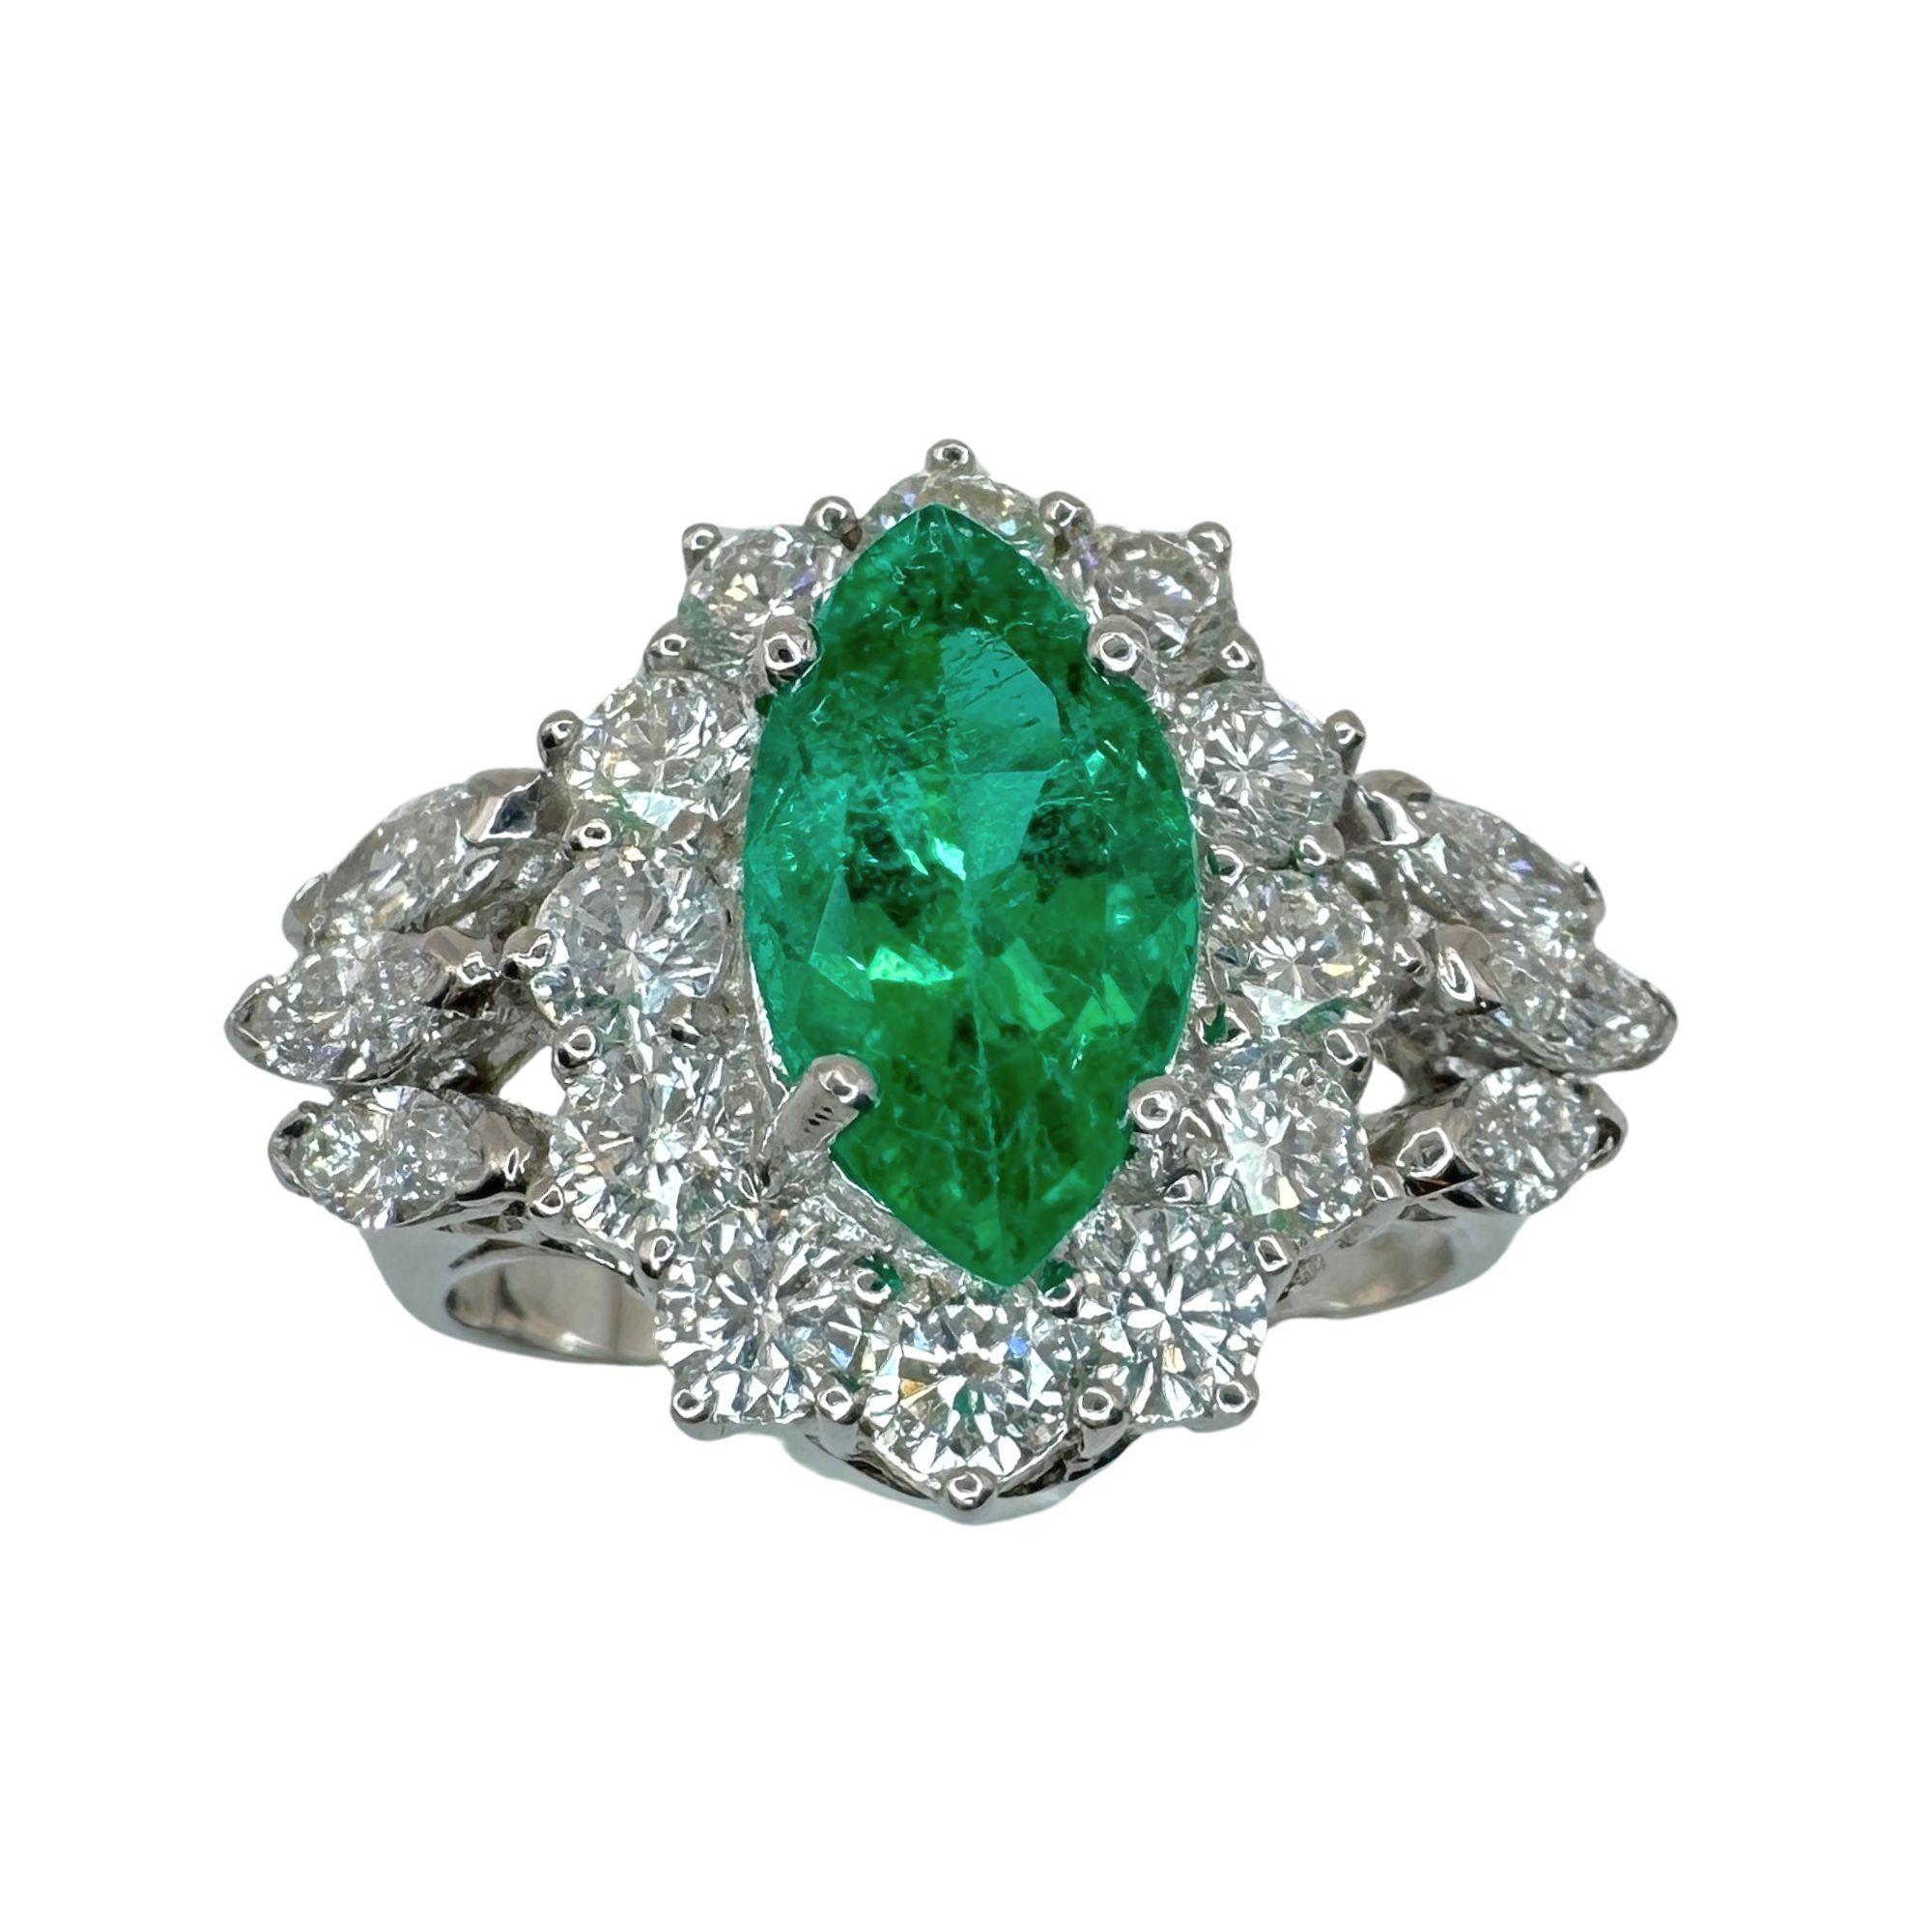 Indulge in luxury with this 18k Diamond and Emerald Ring. Crafted in 18k white gold and adorned with stunning 1.33 carats of diamonds surrounding a beautiful 1.60 carat emerald, this ring exudes elegance and sophistication. In good condition with